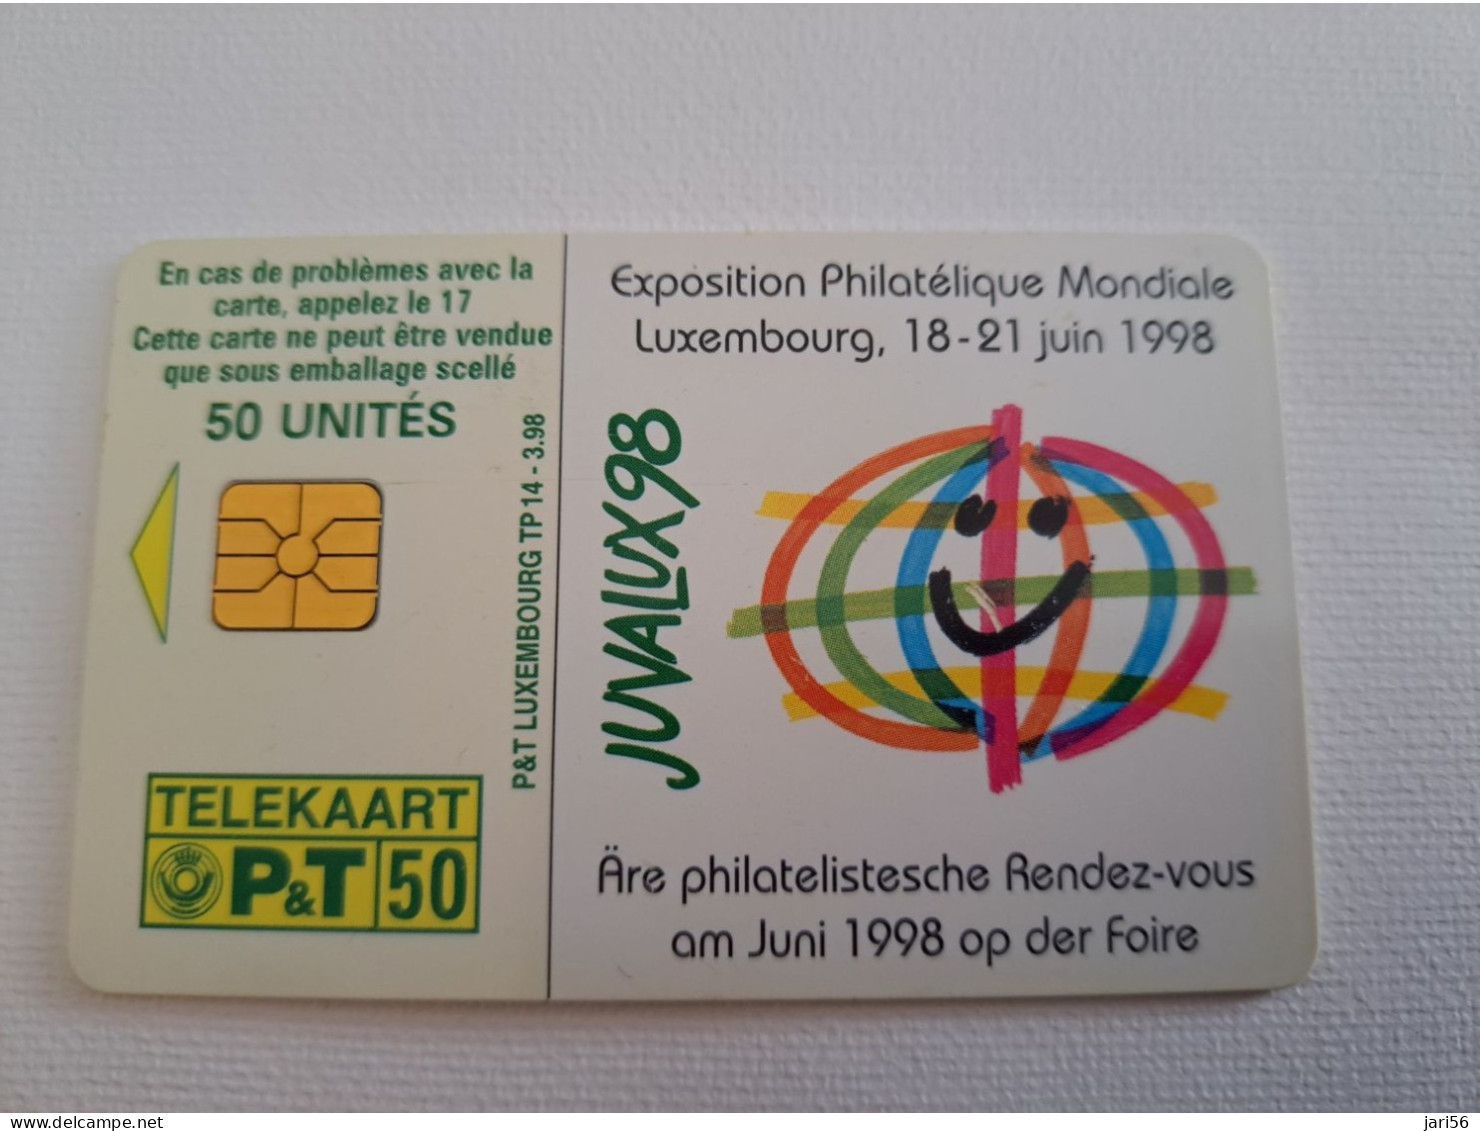 LUXEMBOURG CHIPCARD  50 UNITS  JUVALUX 98/ CAR/CITROEN /STAMP ON CARD   NO; TP 14     ** 13344** - Luxembourg